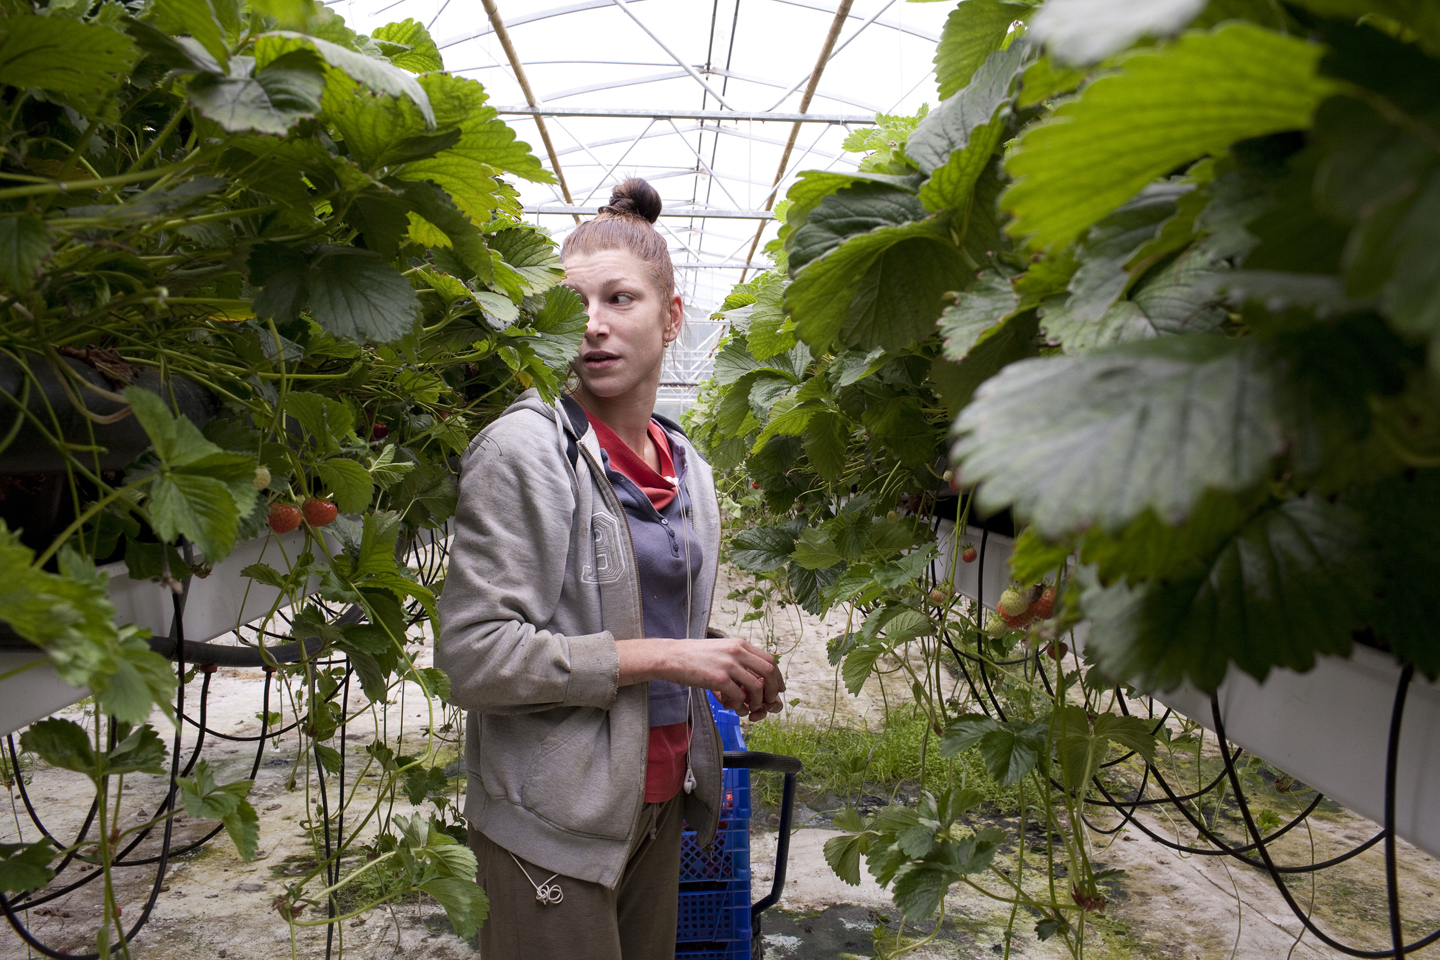  Sophie, a hungarian, picks strawberries at the greenhouse in Fludir. It is common for immigrants from European countries to work in these jobs. She says she will return to Hungary soon. 